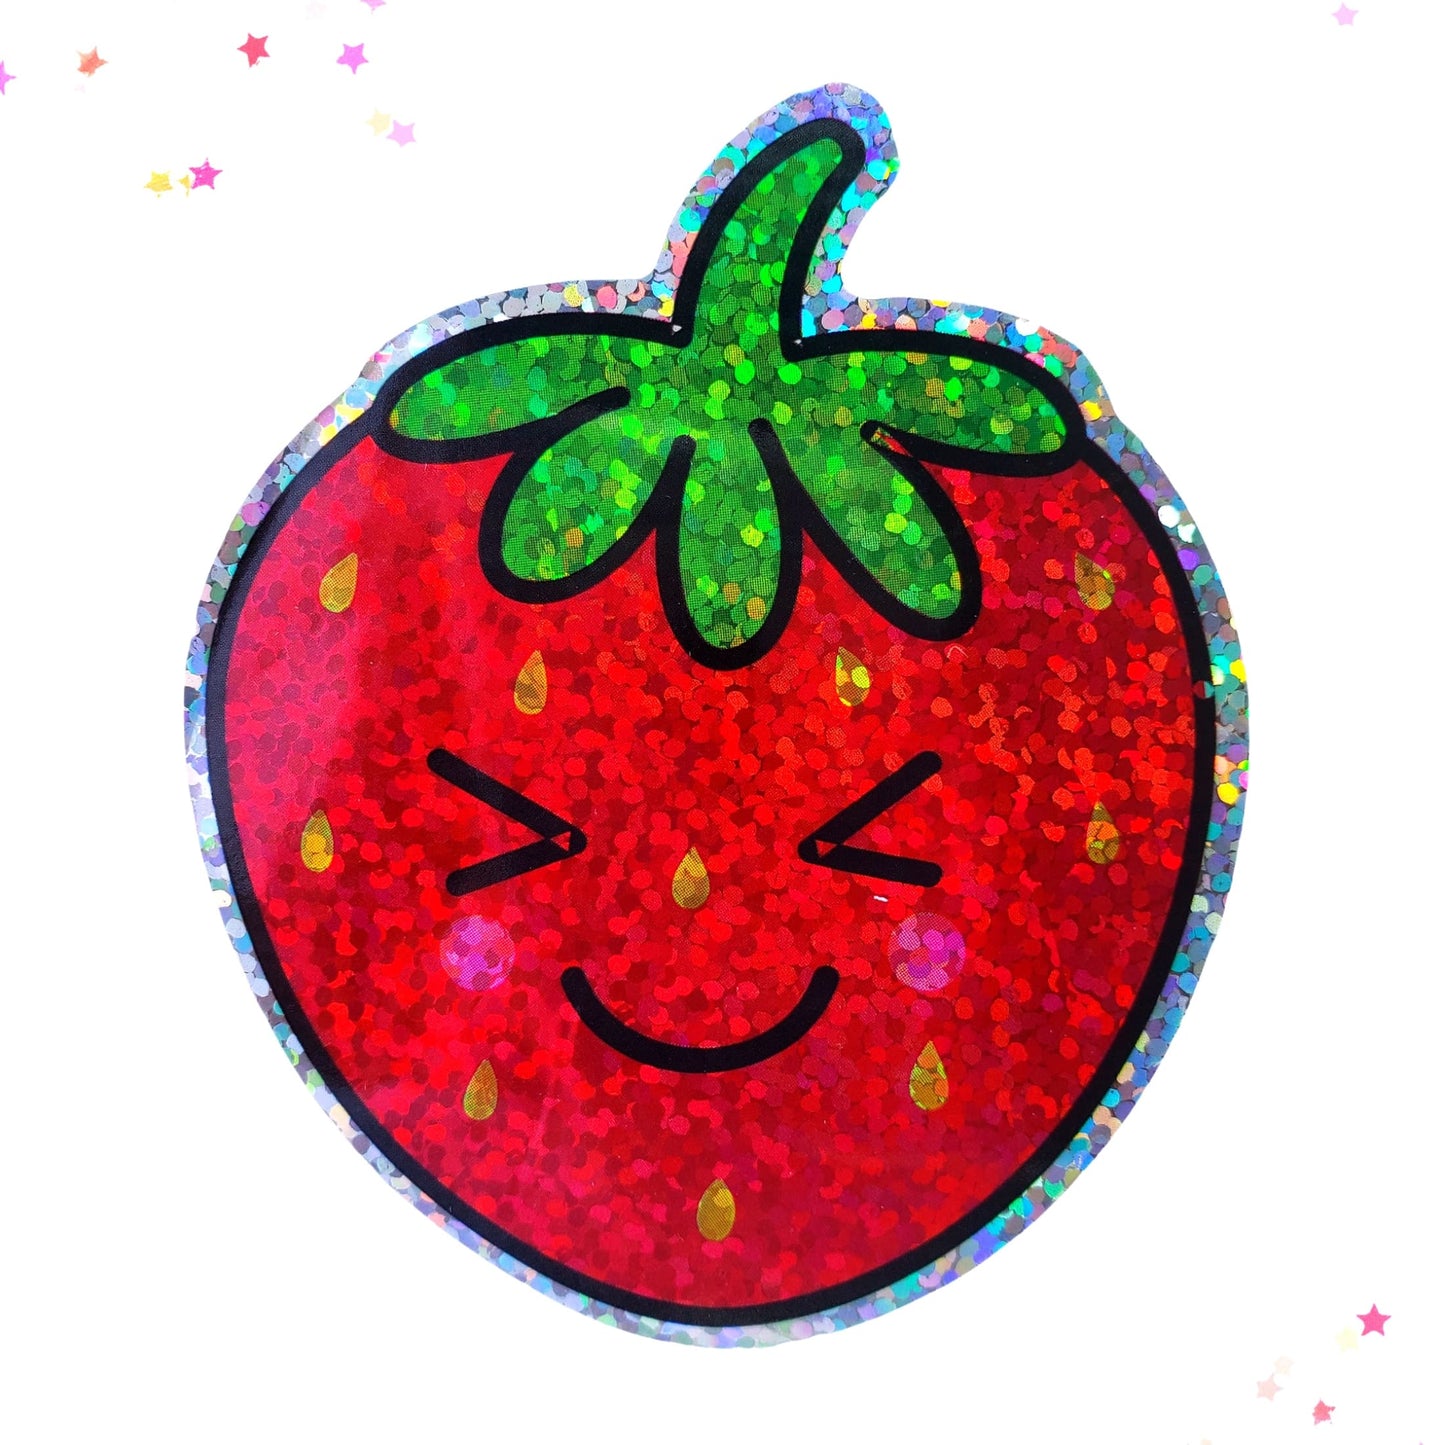 Premium Sticker - Sparkly Holographic Glitter Kawaii Strawberry from Confetti Kitty, Only 2.00